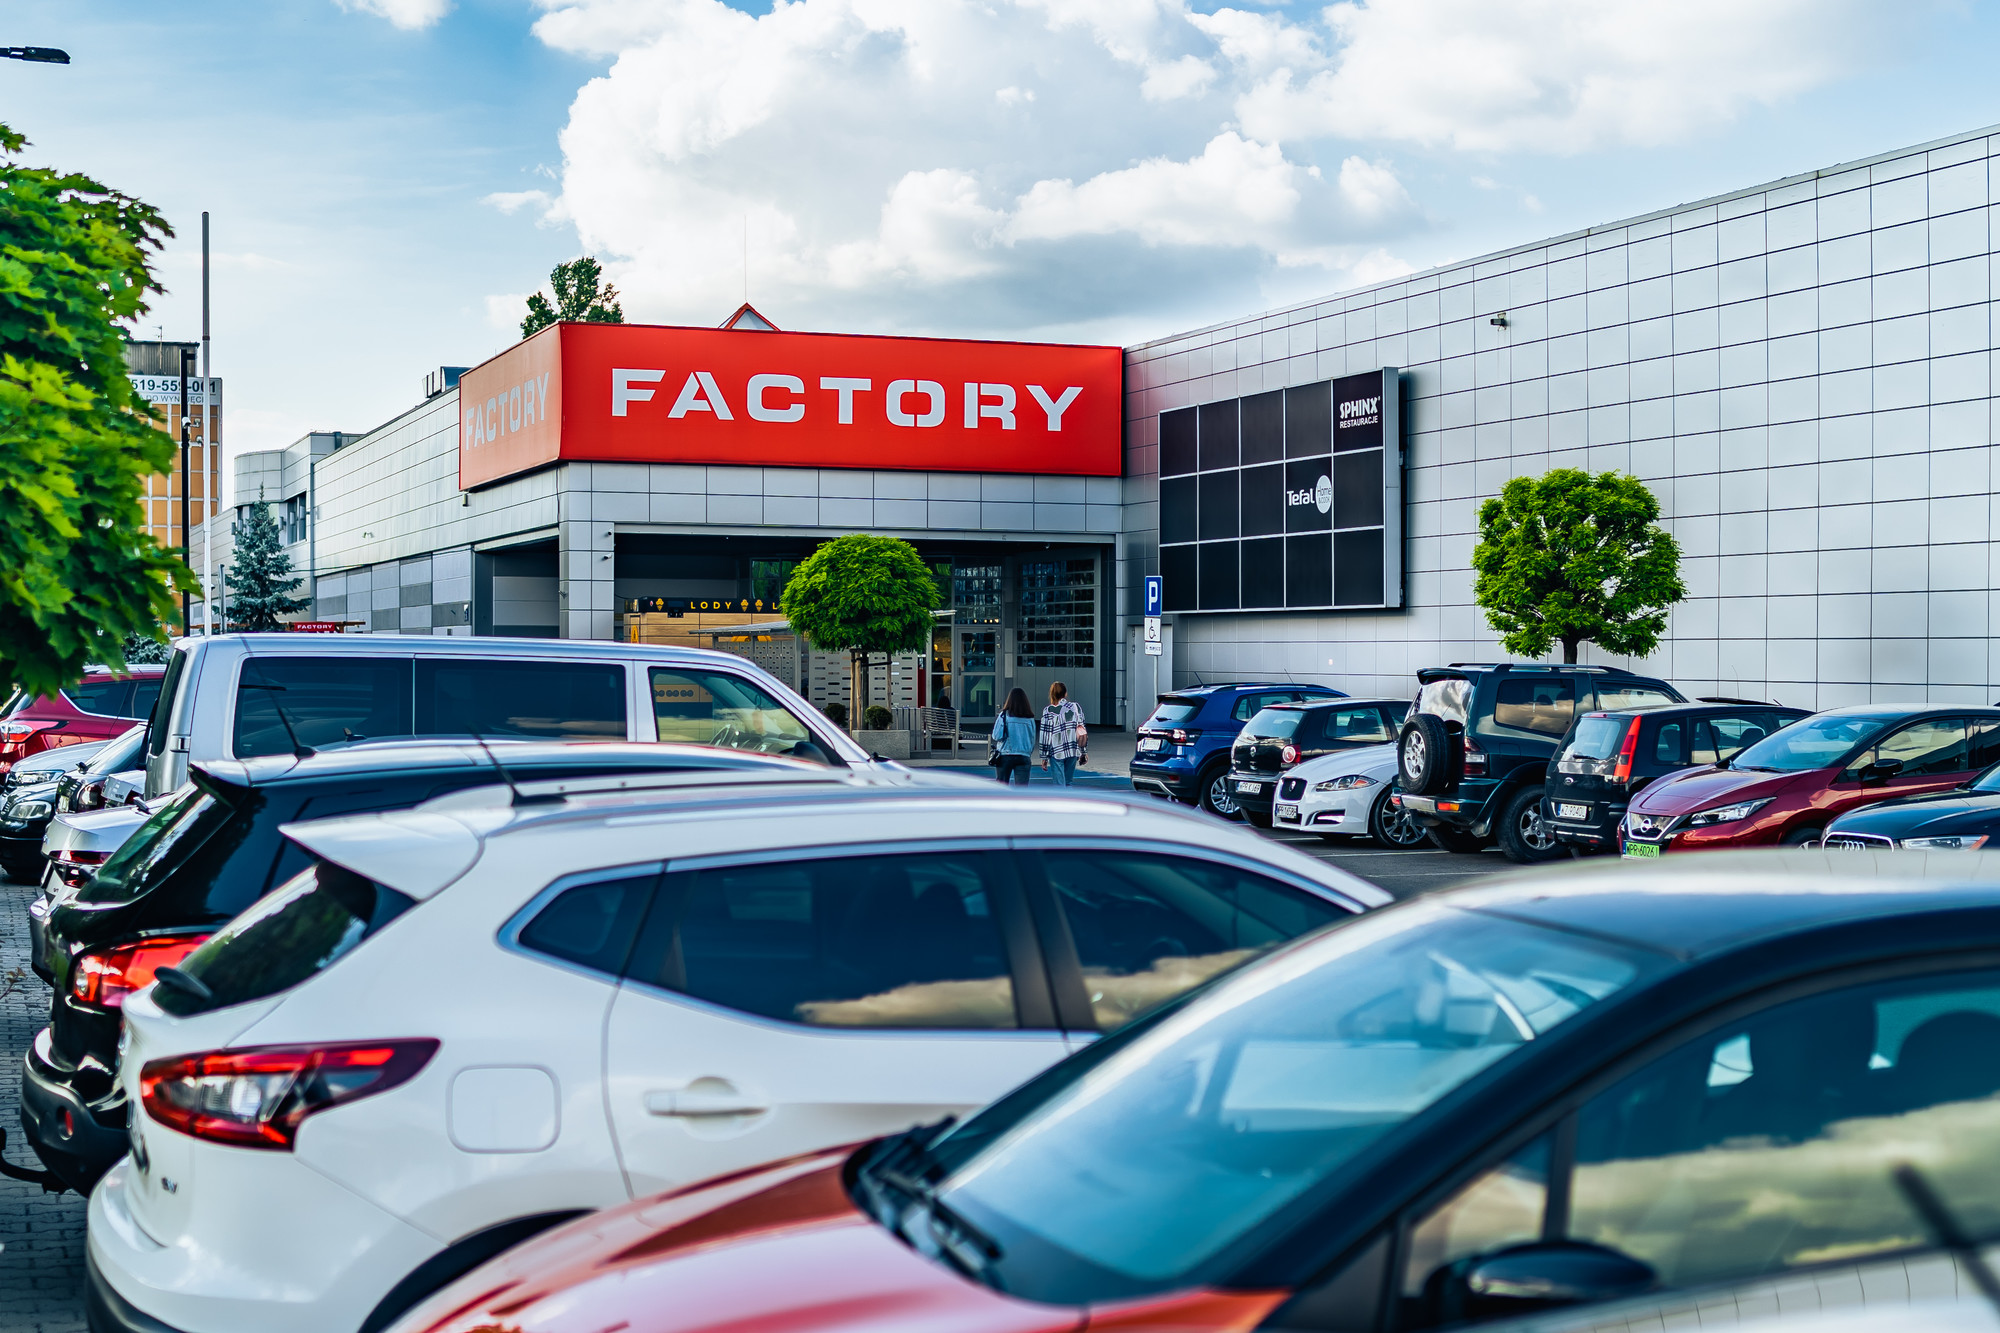 FACTORY Outlet Ursus | Shopping in | Warsaw